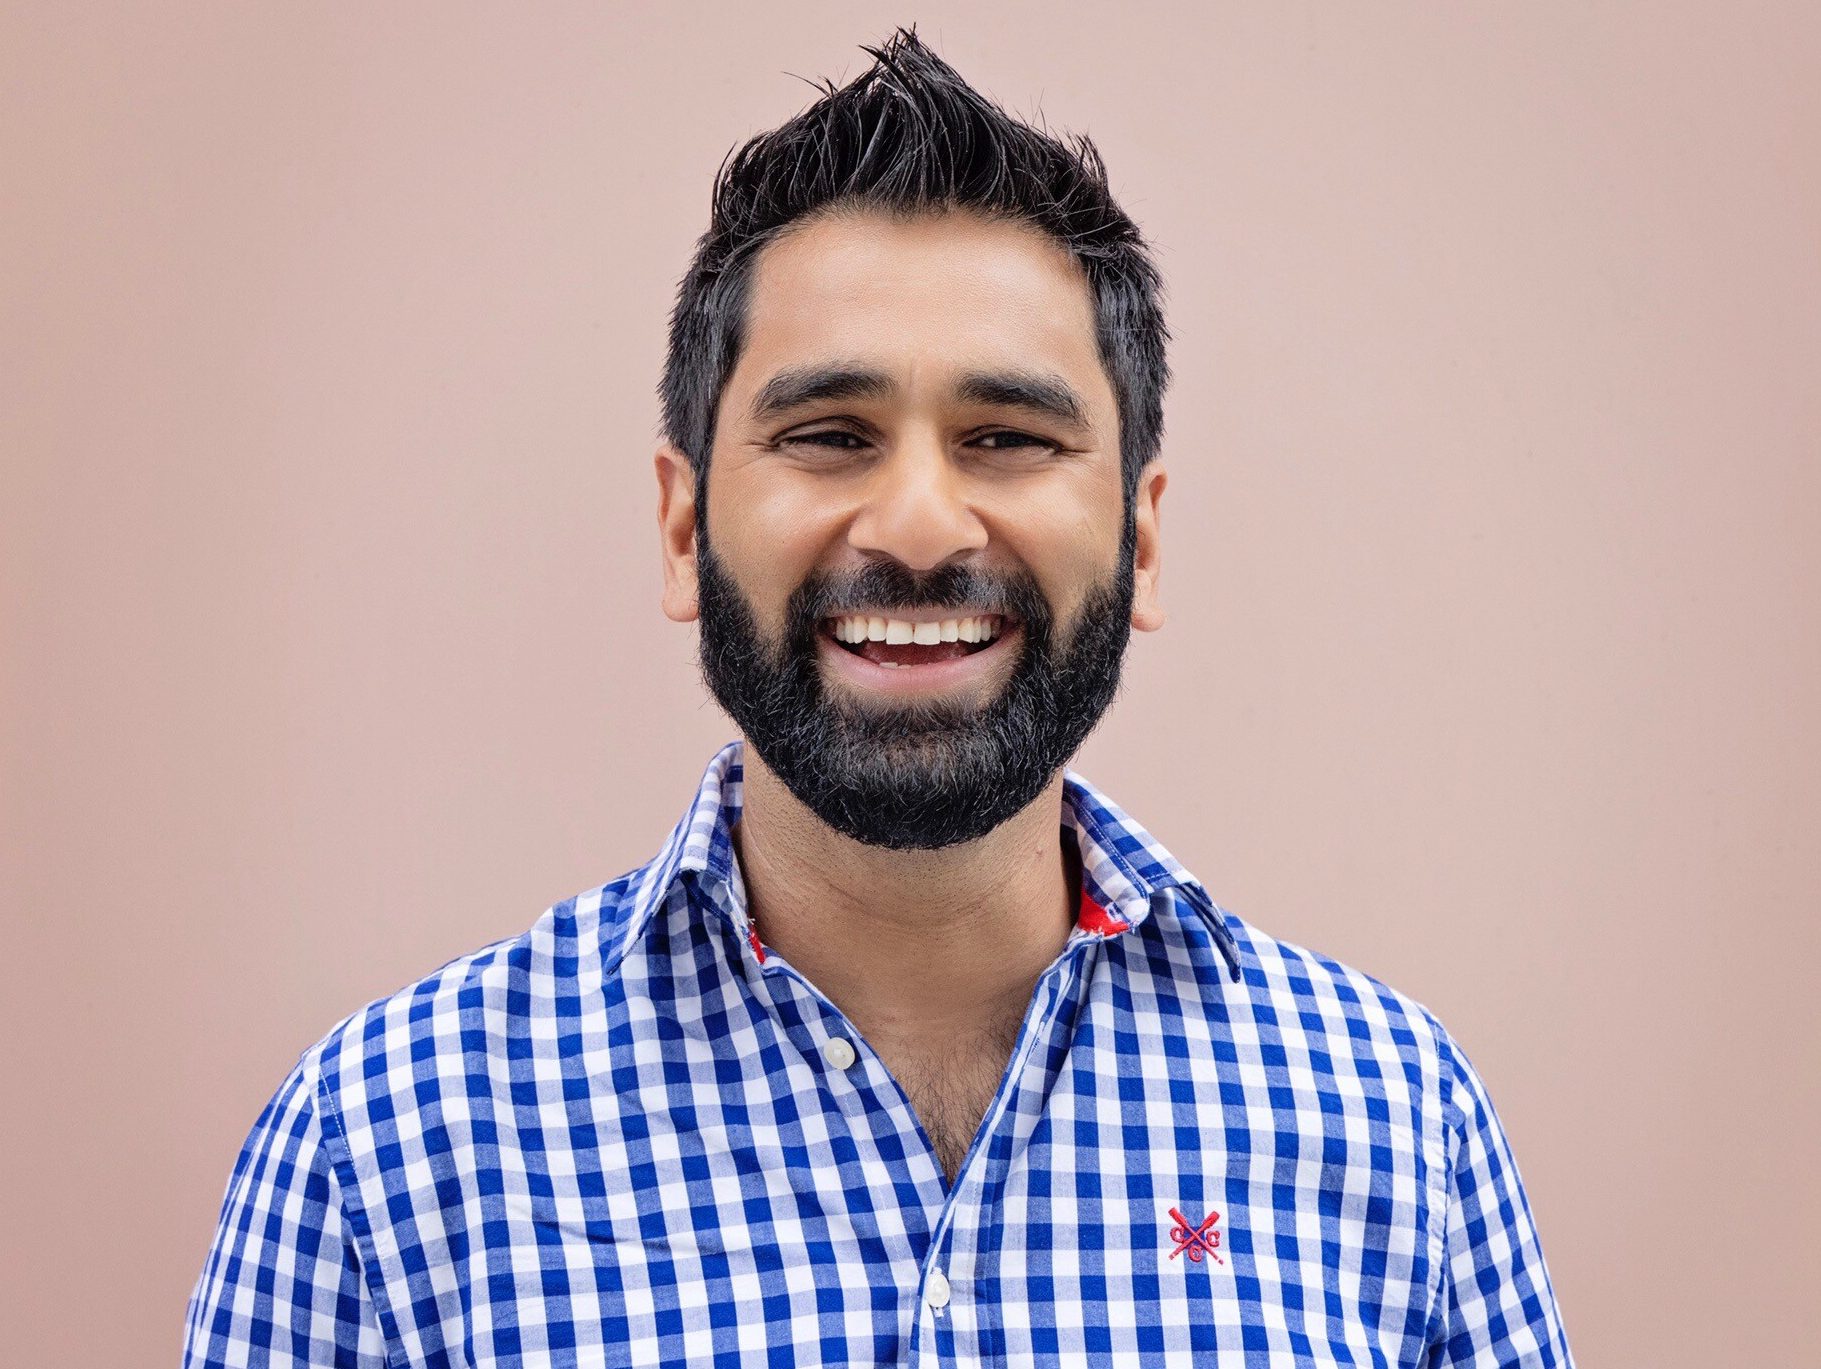 Dr Amit Patel has a beard and moustache. He is smiling, wearing a blue and white check shirt standing against a pink background.